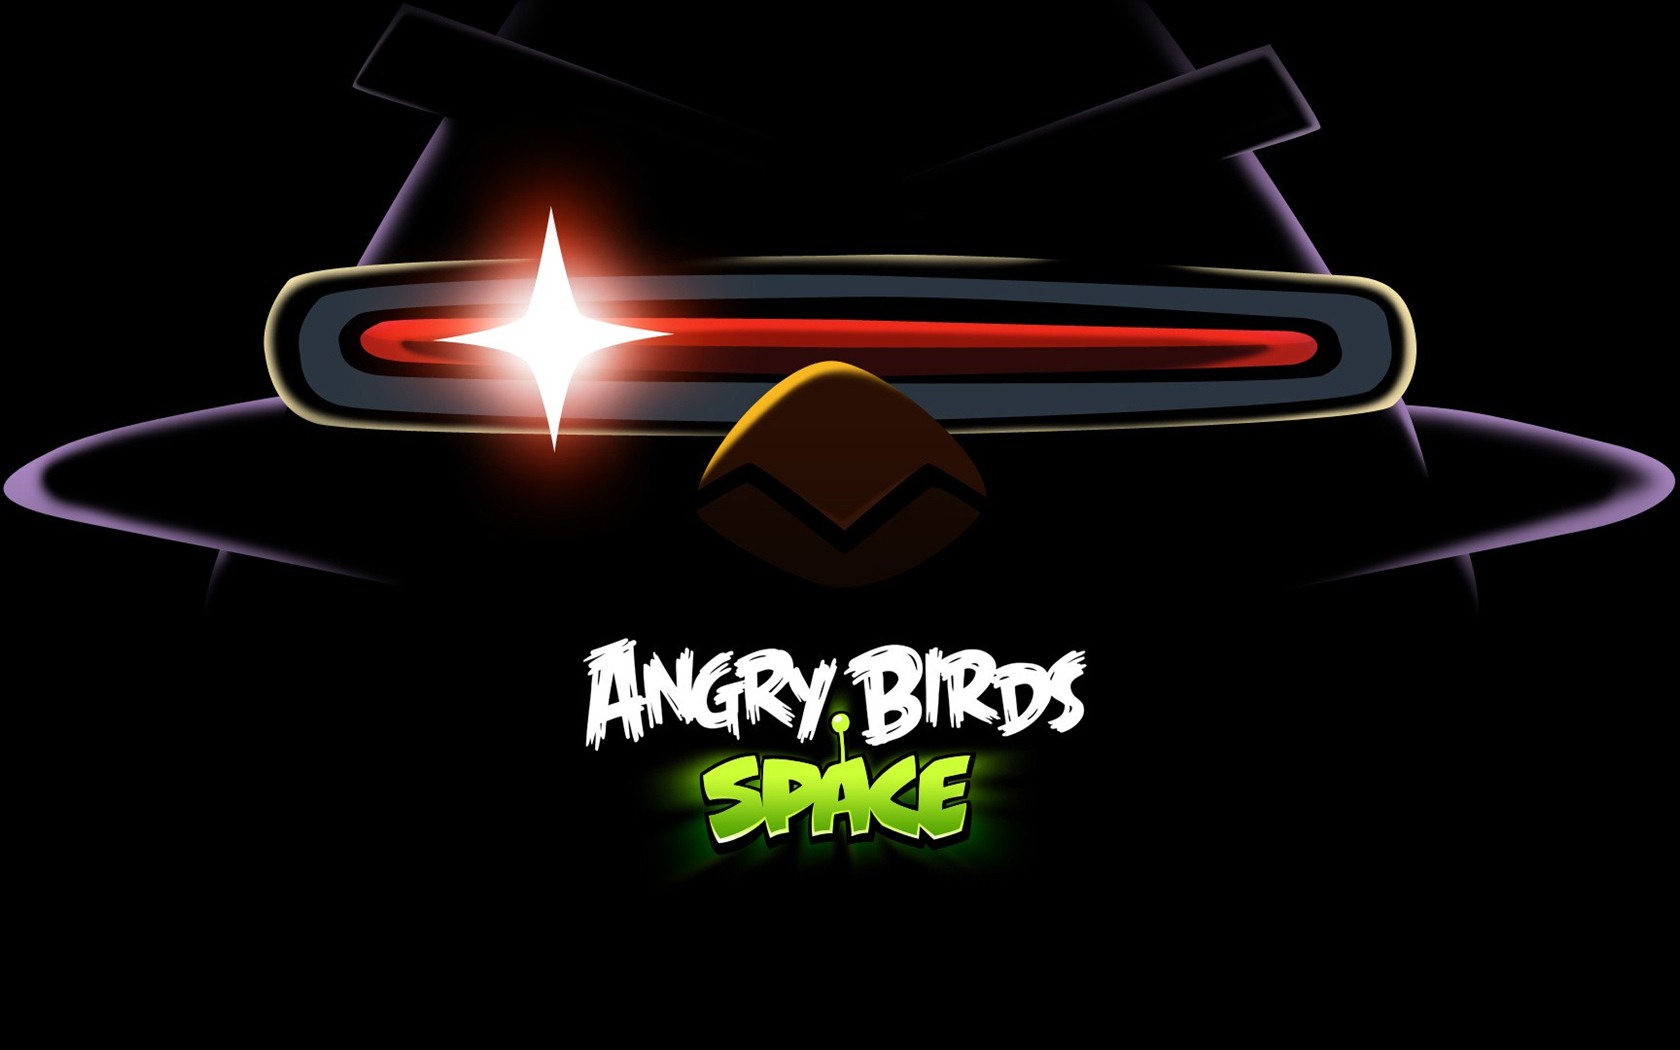 Angry Birds Spiel wallpapers #22 - 1680x1050